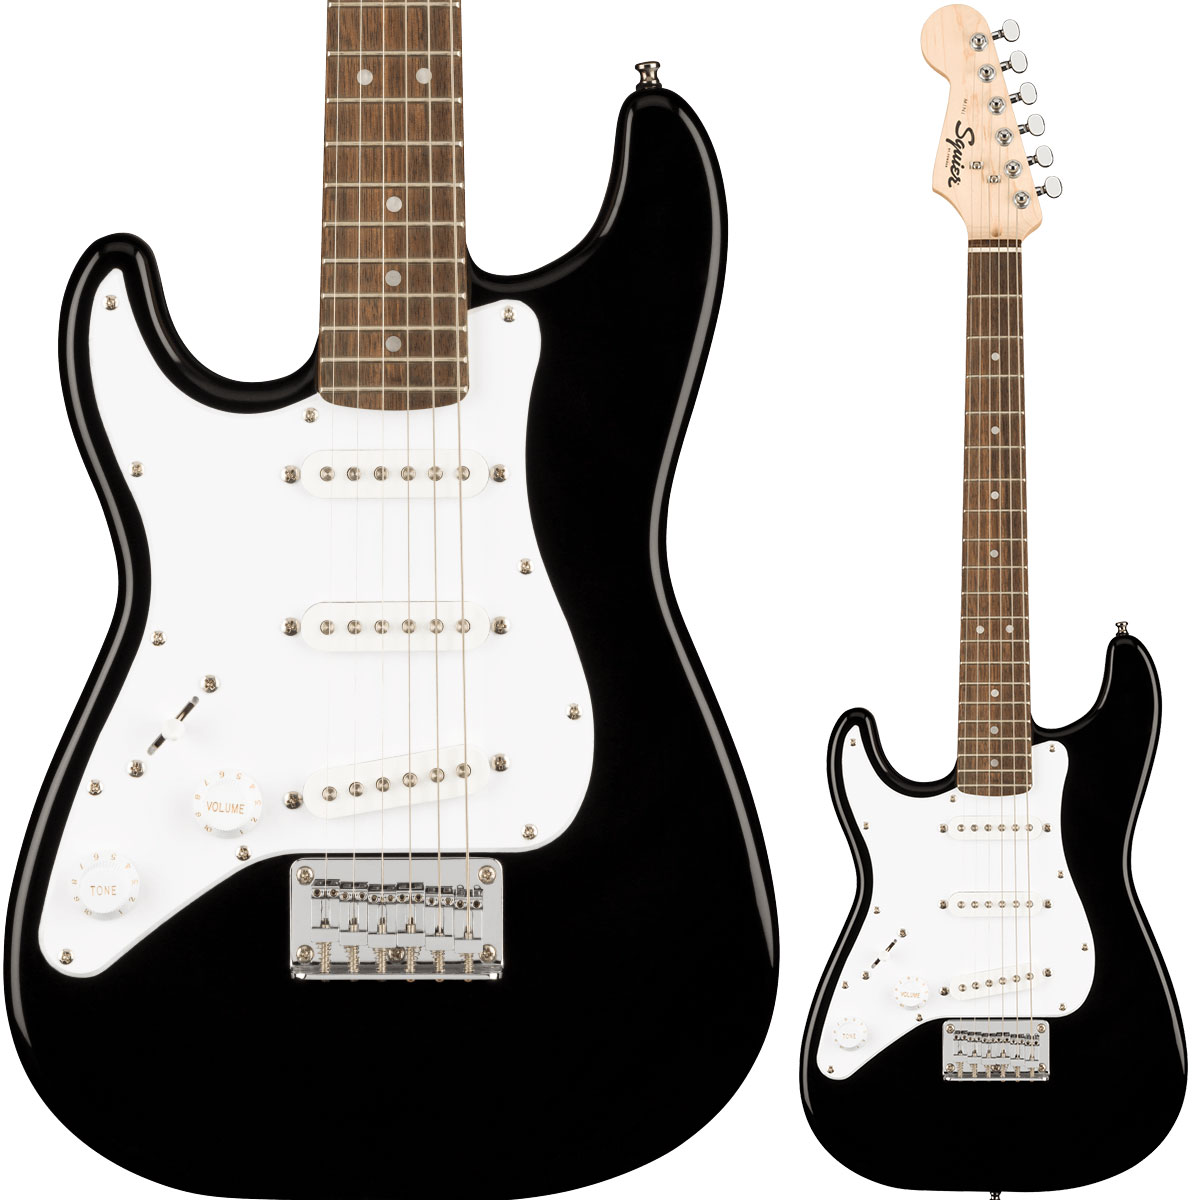 Squier by Fender Mini Stratocaster Left-Handed Black エレキギター